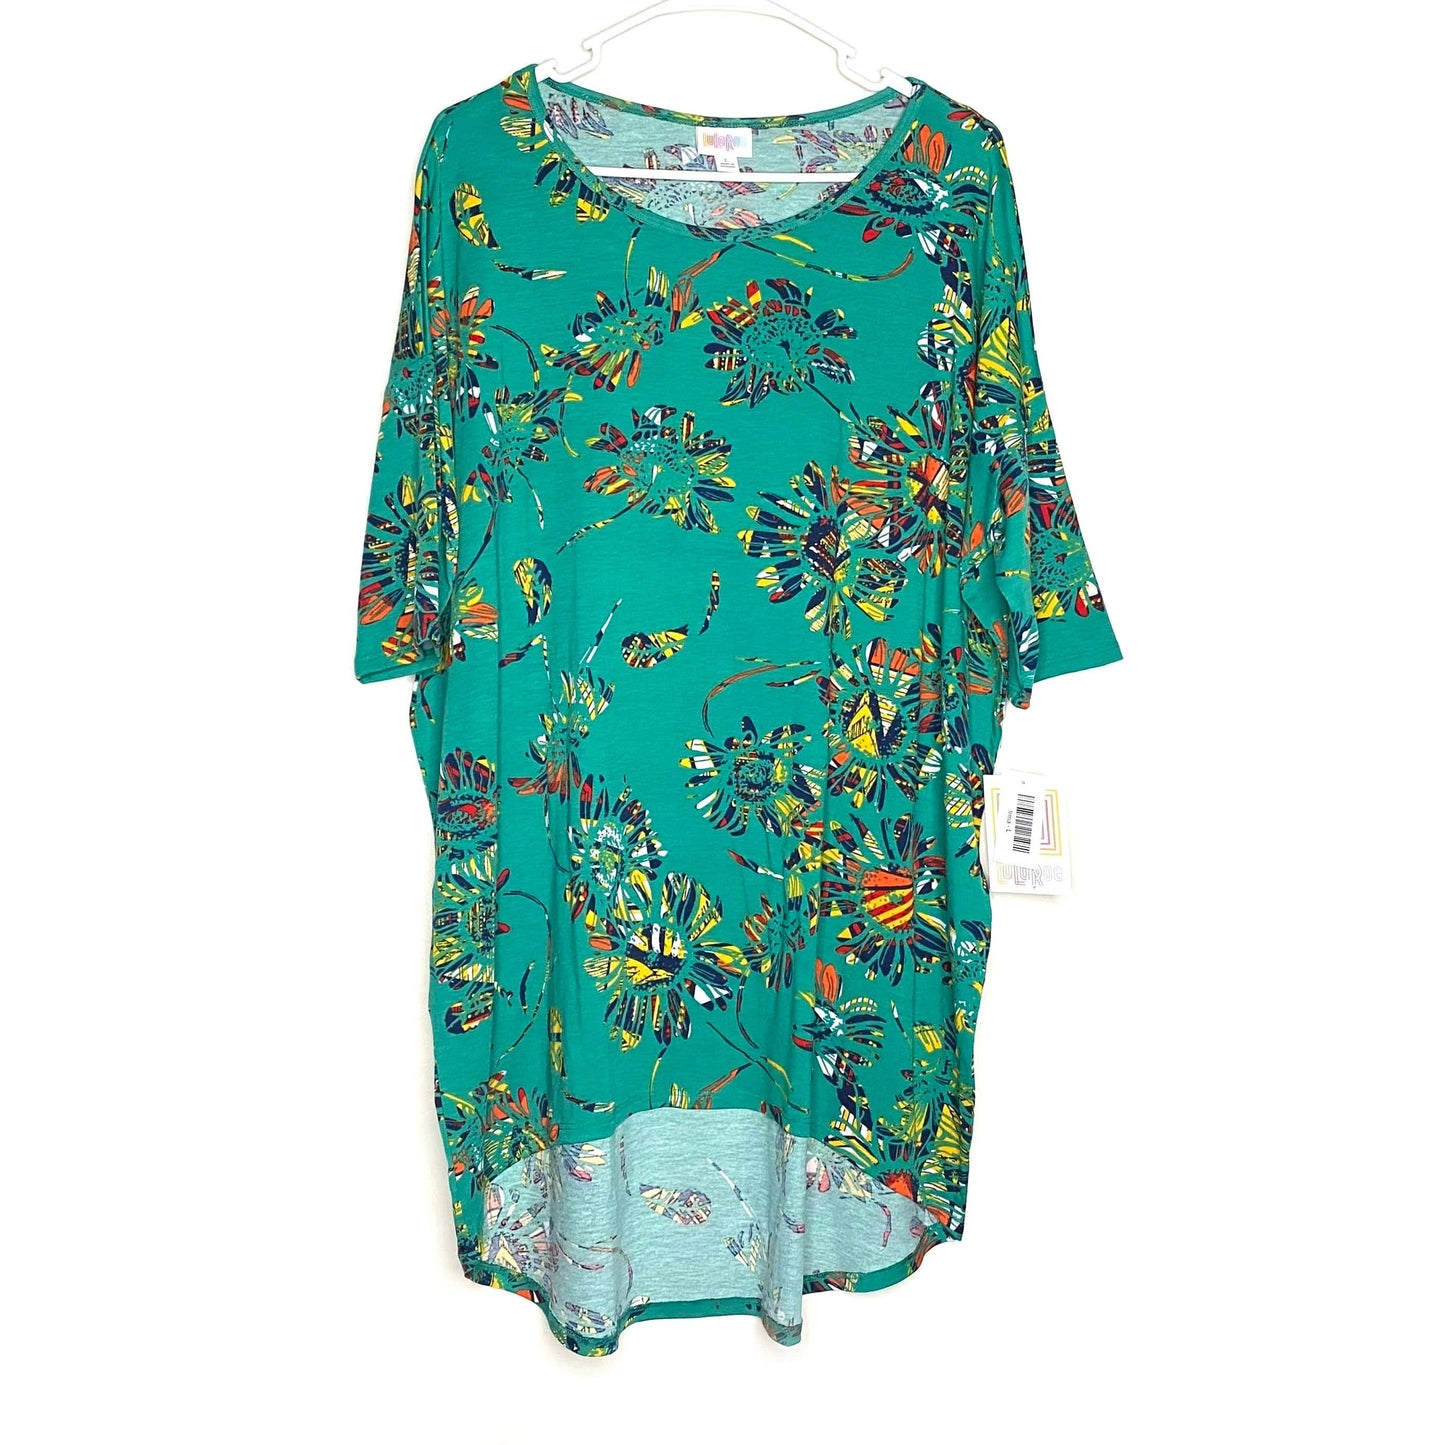 LuLaRoe Womens Size L Irma Green Feathers/Floral T-Shirt S/s NWT